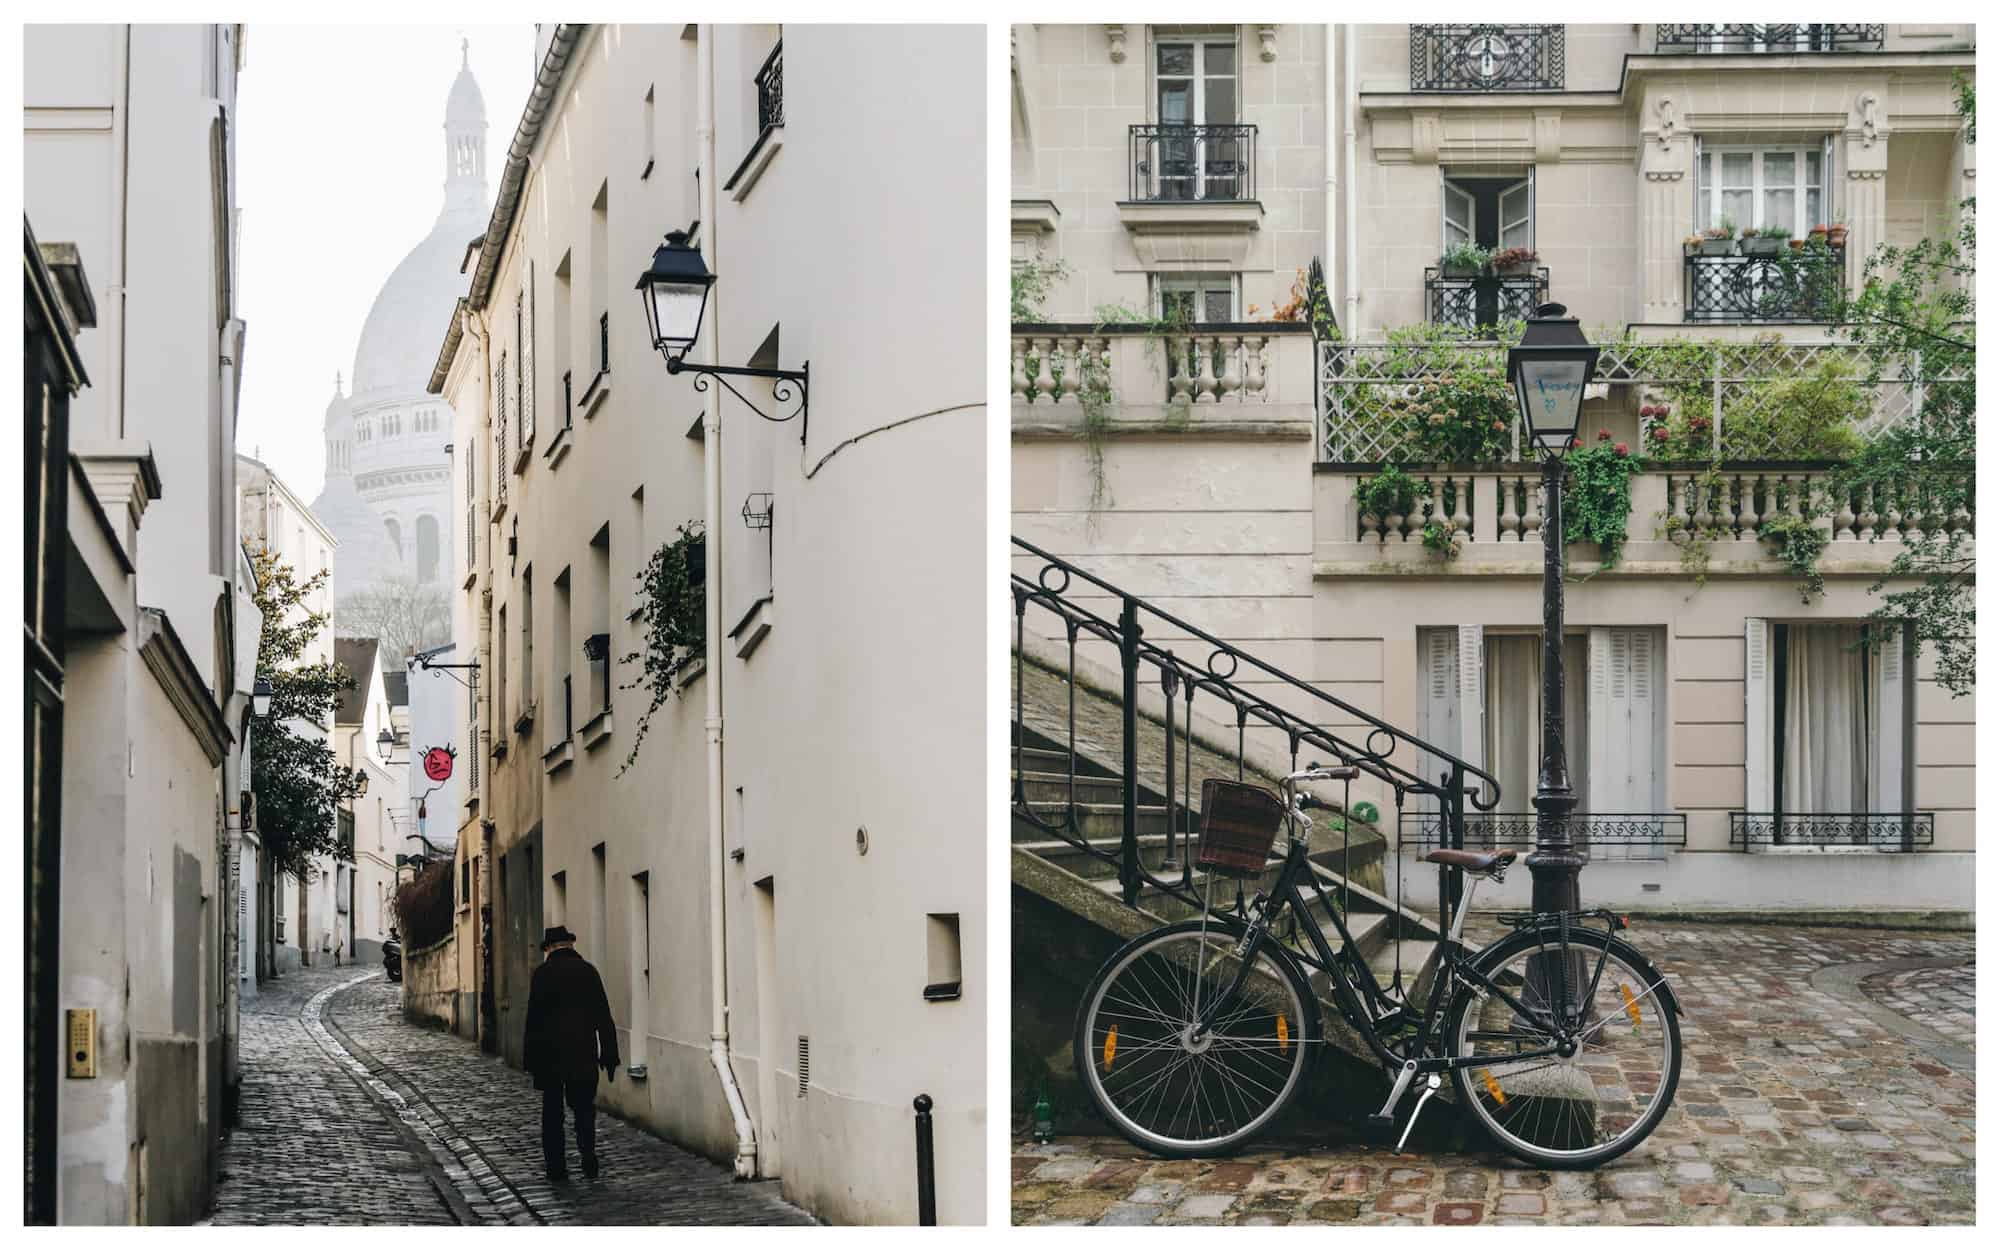 Before everyone is back in the city after the summer holidays, Paris empties, leaving you to enjoy the quiet streets of Montmartre like this lone man walking towards the Sacré Coeur (left). A bike with a basket parked on a cobblestone square in Montmartre (right).